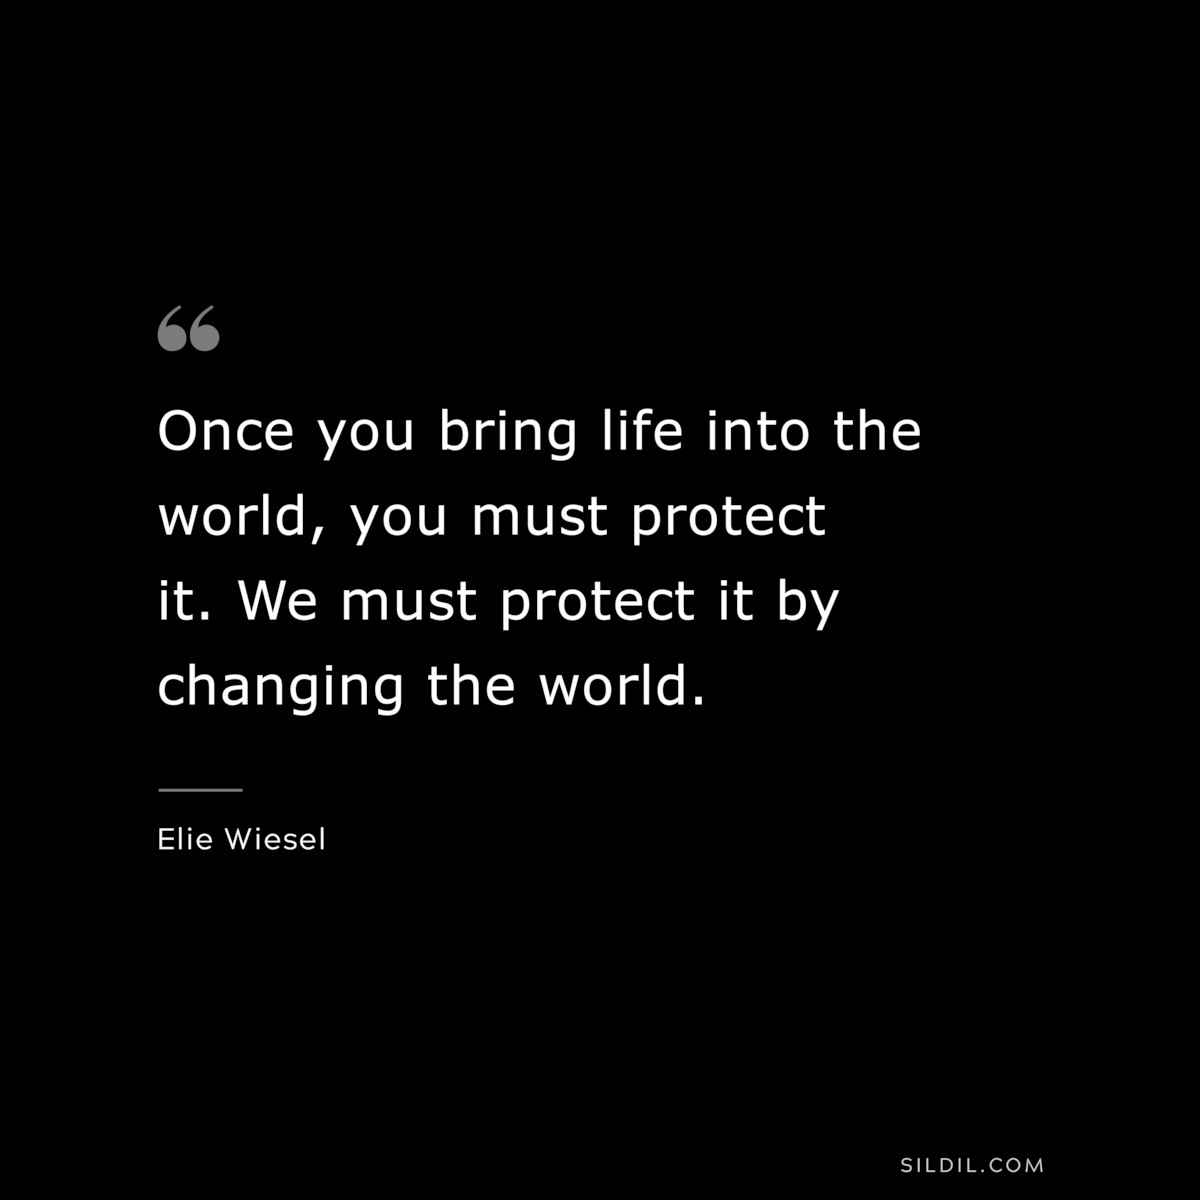 Once you bring life into the world, you must protect it. We must protect it by changing the world. ― Elie Wiesel